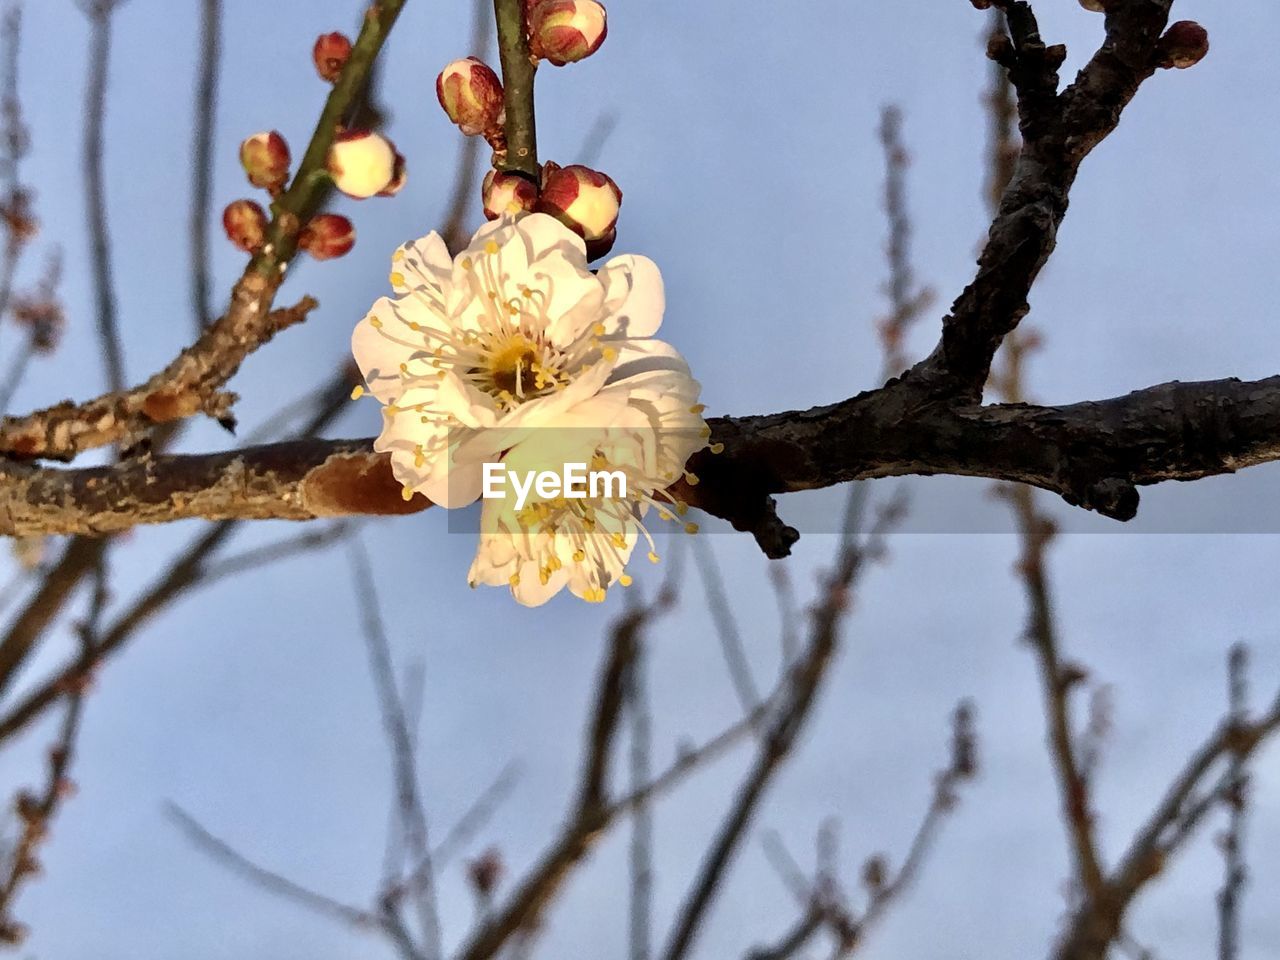 CLOSE-UP OF WHITE CHERRY BLOSSOMS ON BRANCH